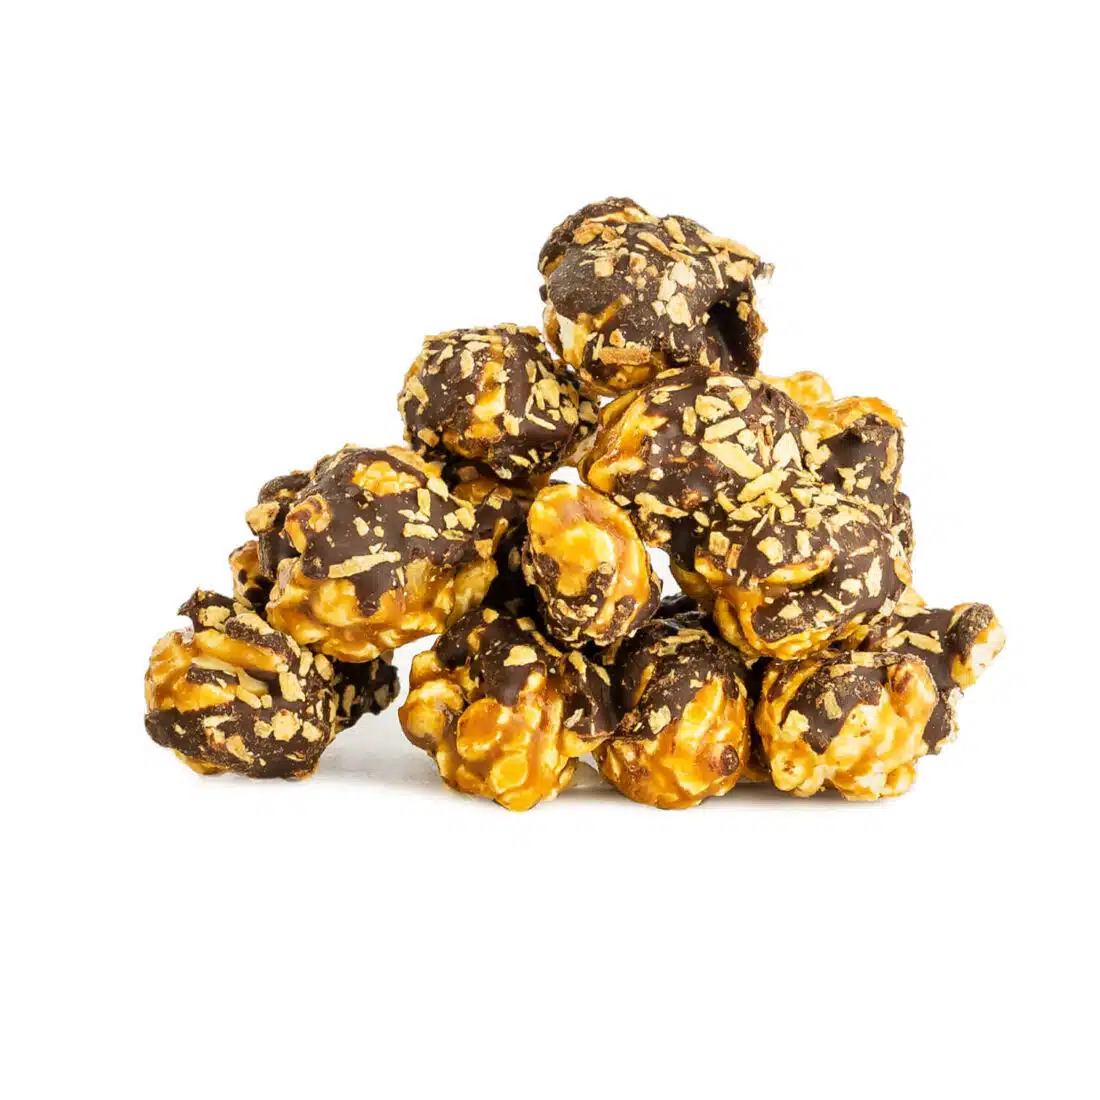 coconut and chocolate popcorn flavor